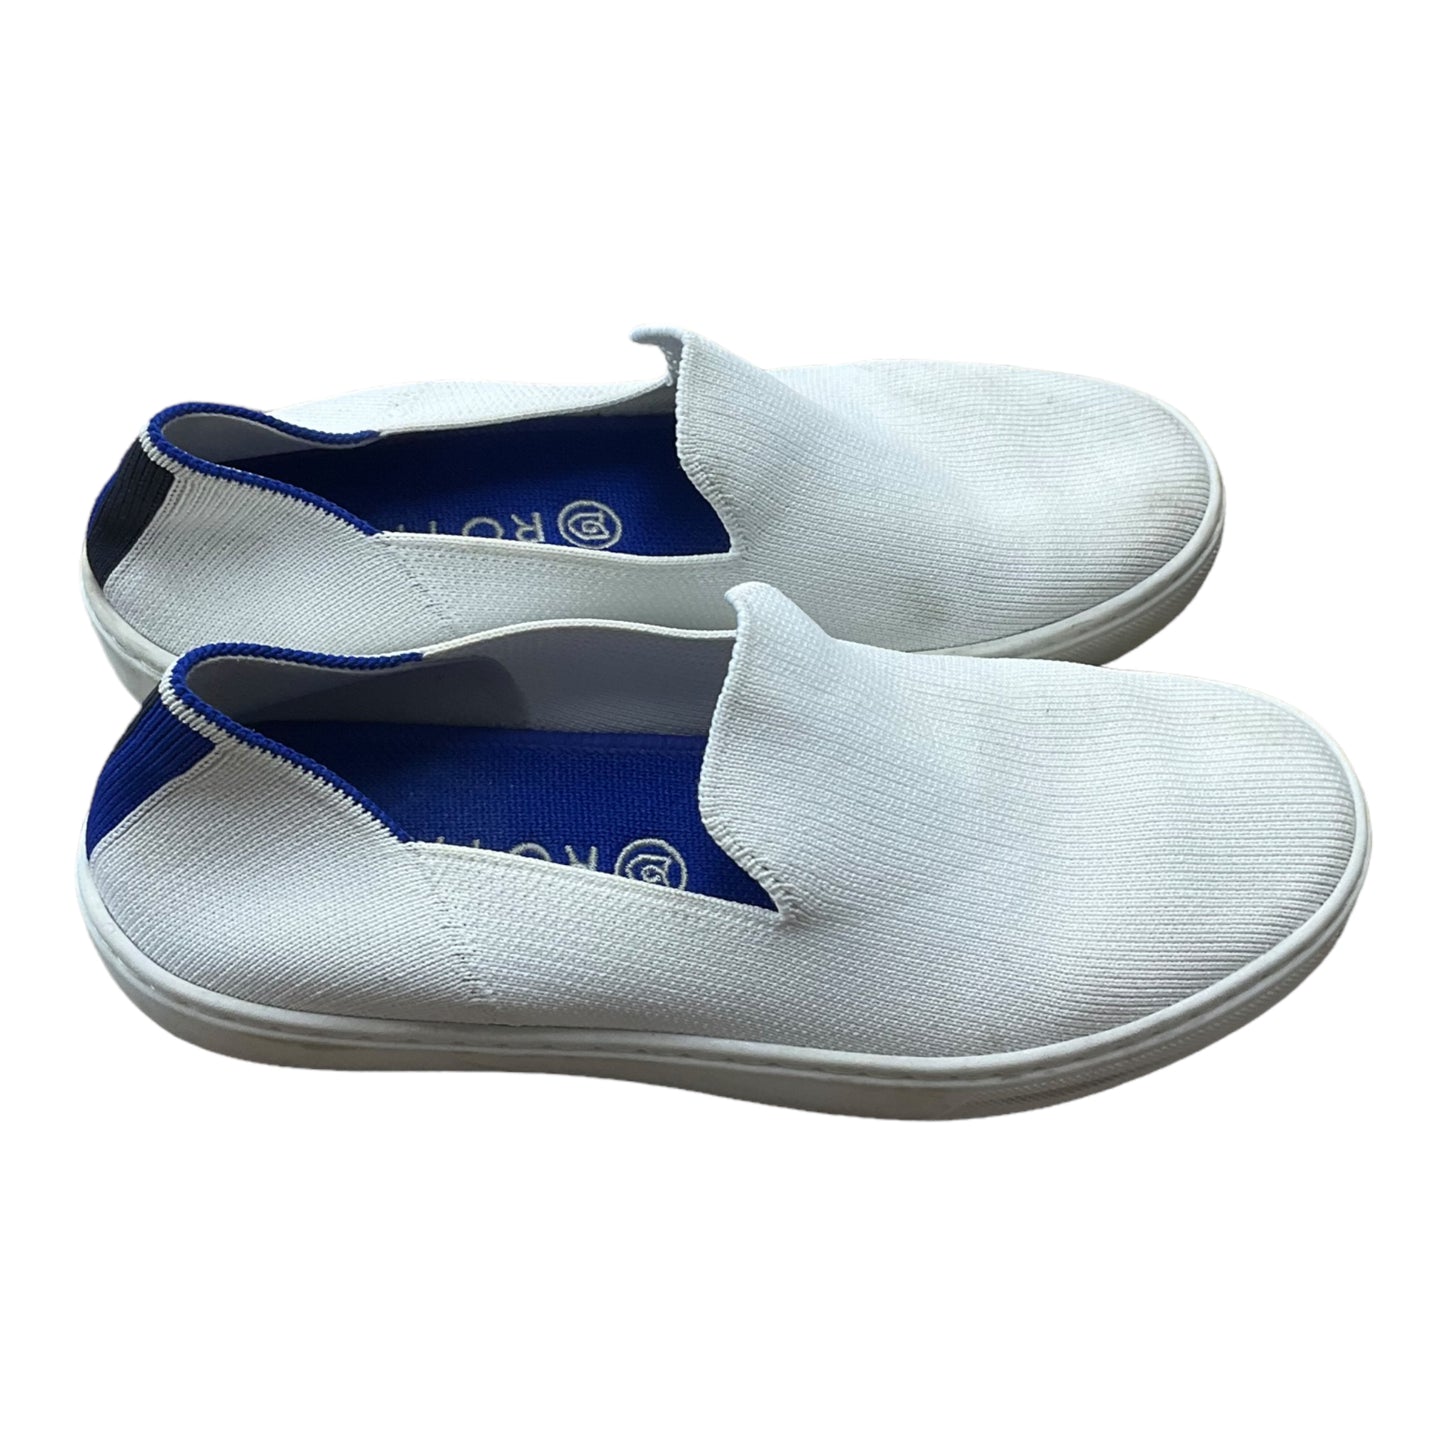 Shoes Flats Boat By Rothys  Size: 6